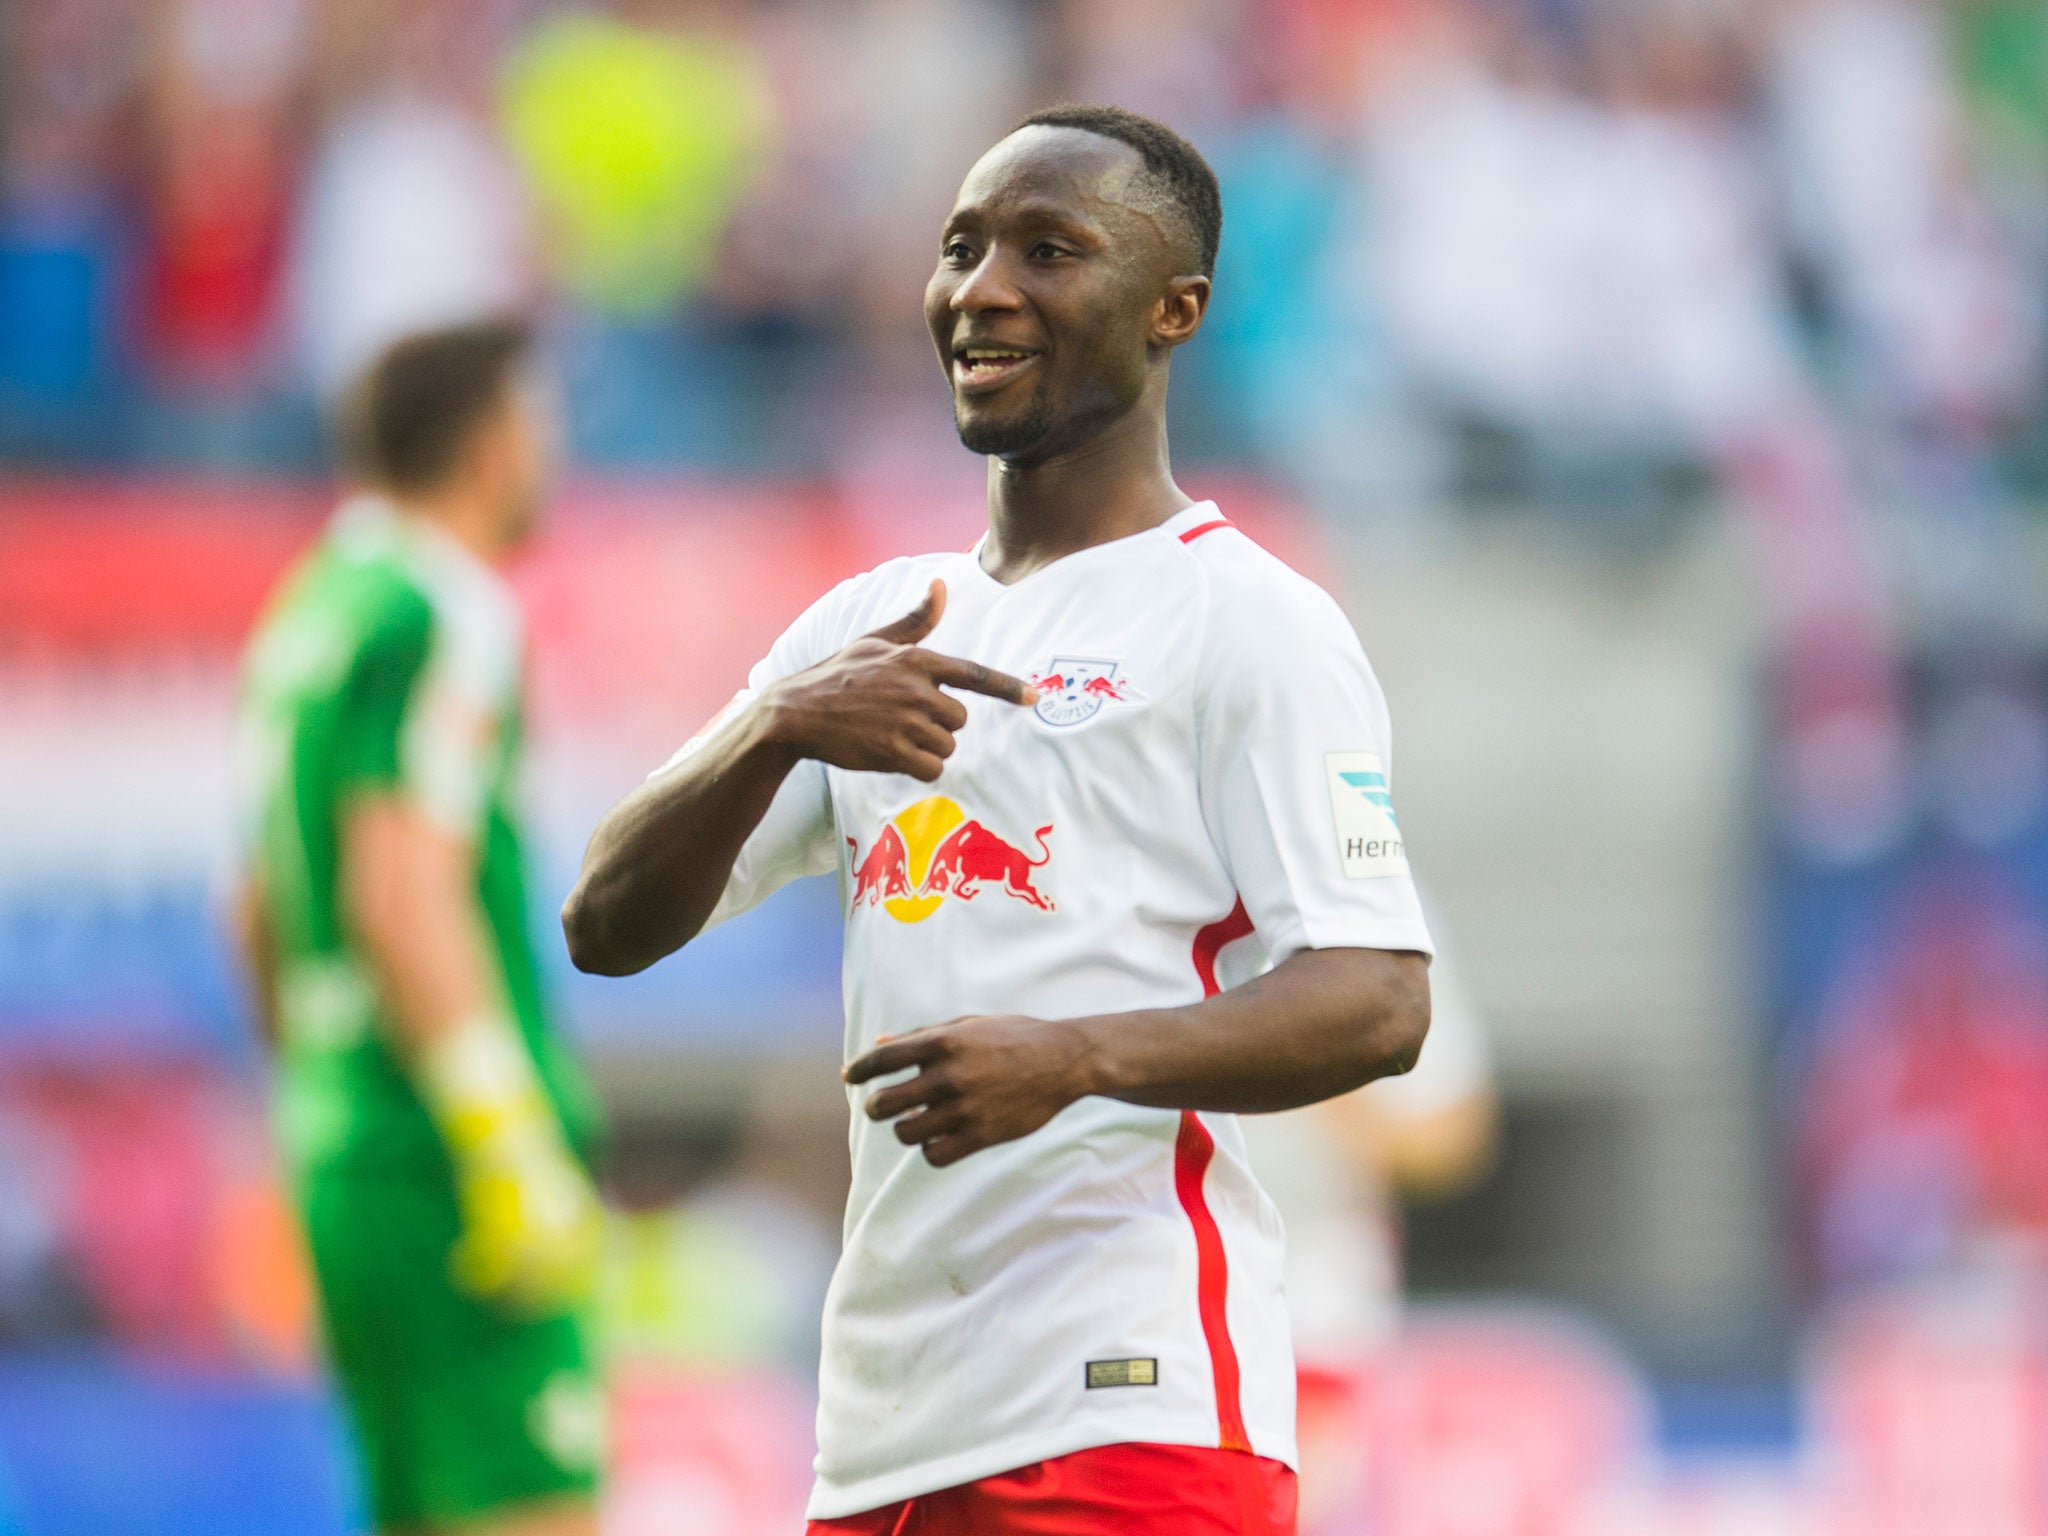 Naby Keita scored eight goals and provided seven assists for RB Leipzig last season